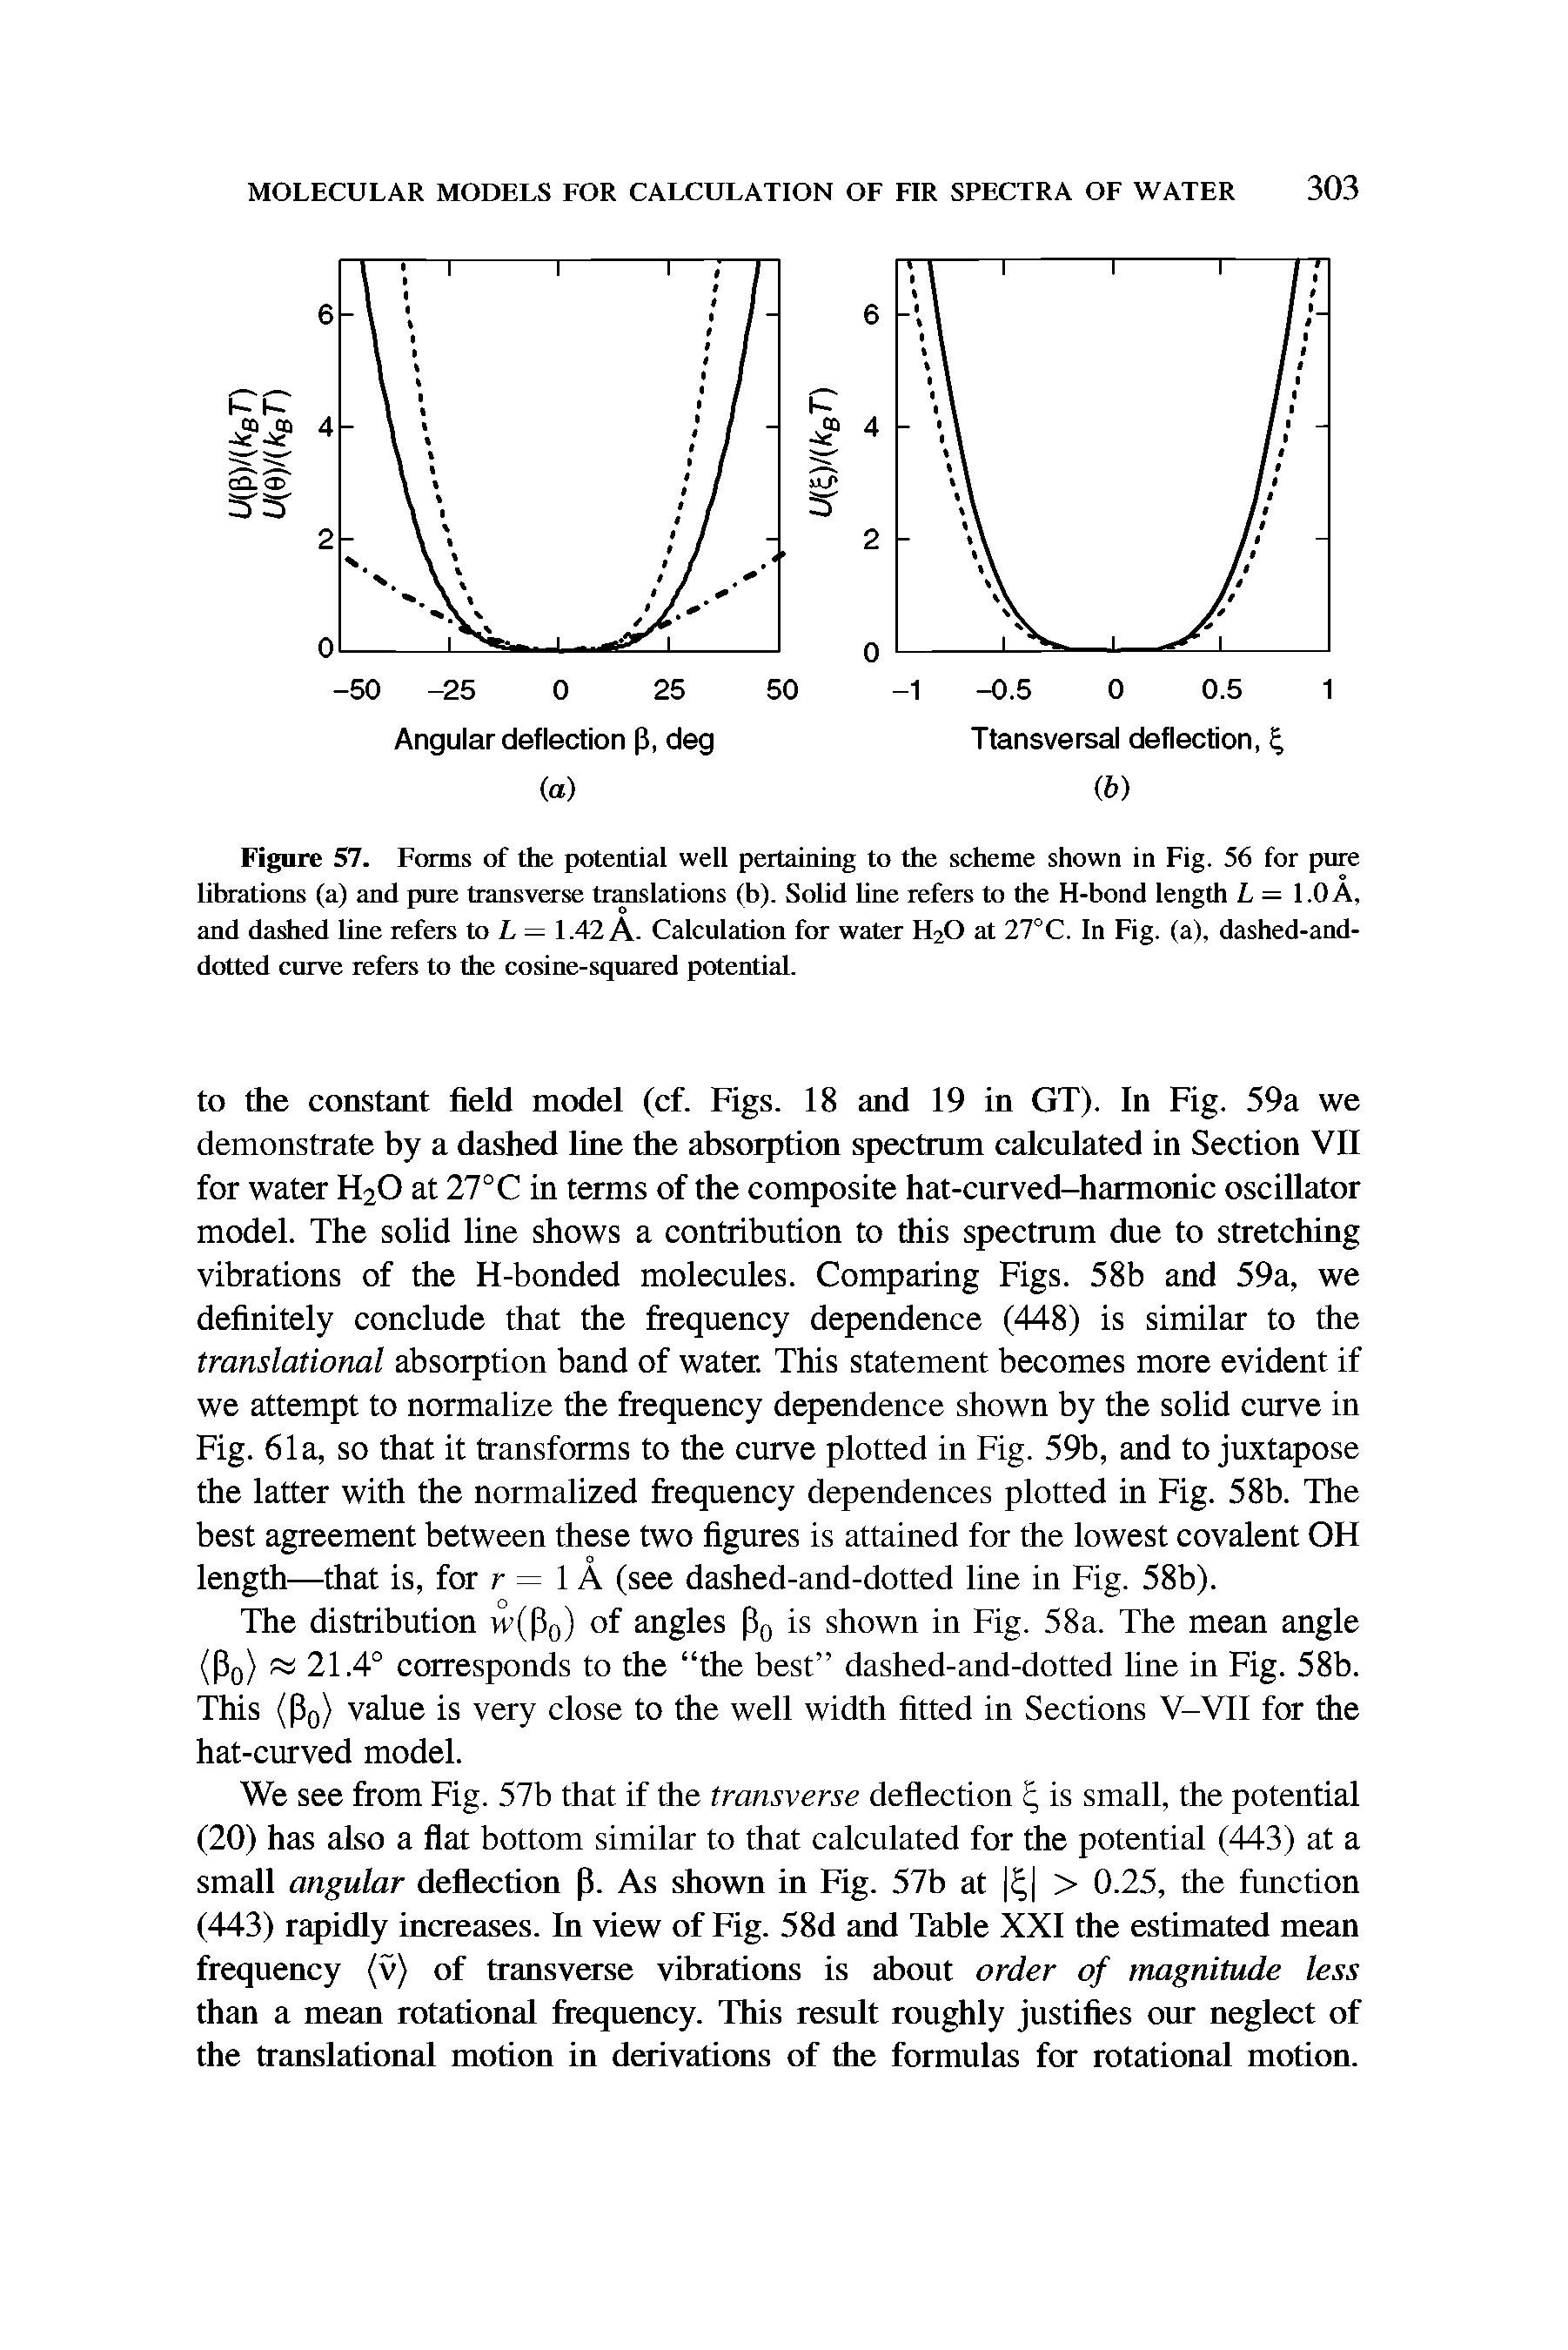 Figure 57. Forms of the potential well pertaining to the scheme shown in Fig. 56 for pure librations (a) and pure transverse translations (b). Solid line refers to the H-bond length L = 1.0 A, and dashed line refers to L = 1.42 A. Calculation for water H20 at 27°C. In Fig. (a), dashed-and-dotted curve refers to the cosine-squared potential.